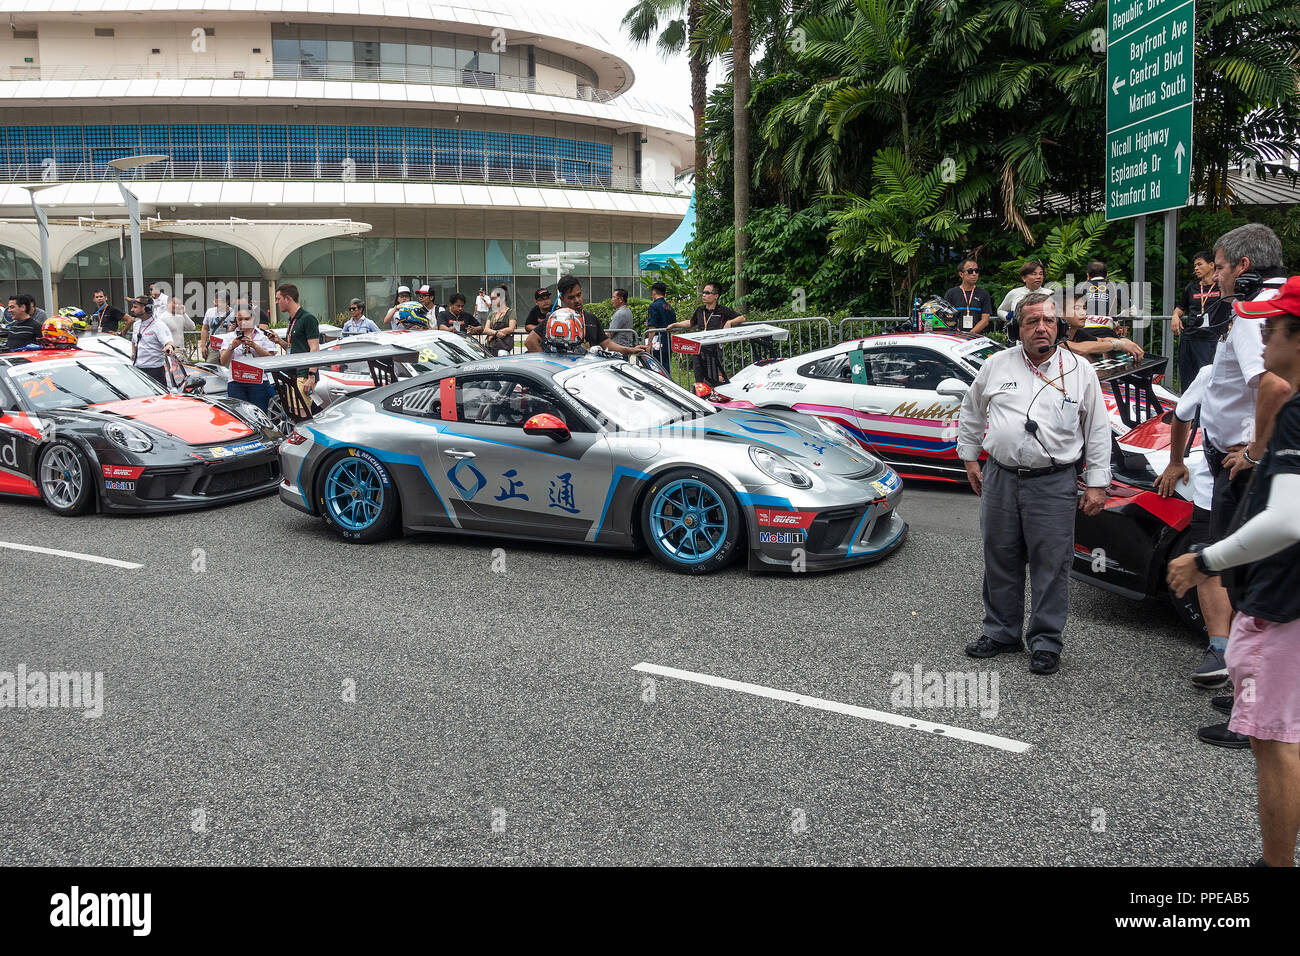 Porsche 911 GT3 Racing Cars Participating in the Porsche Carrera Cup Asia at the Marina Bay Street Circuit Singapore Asia Stock Photo